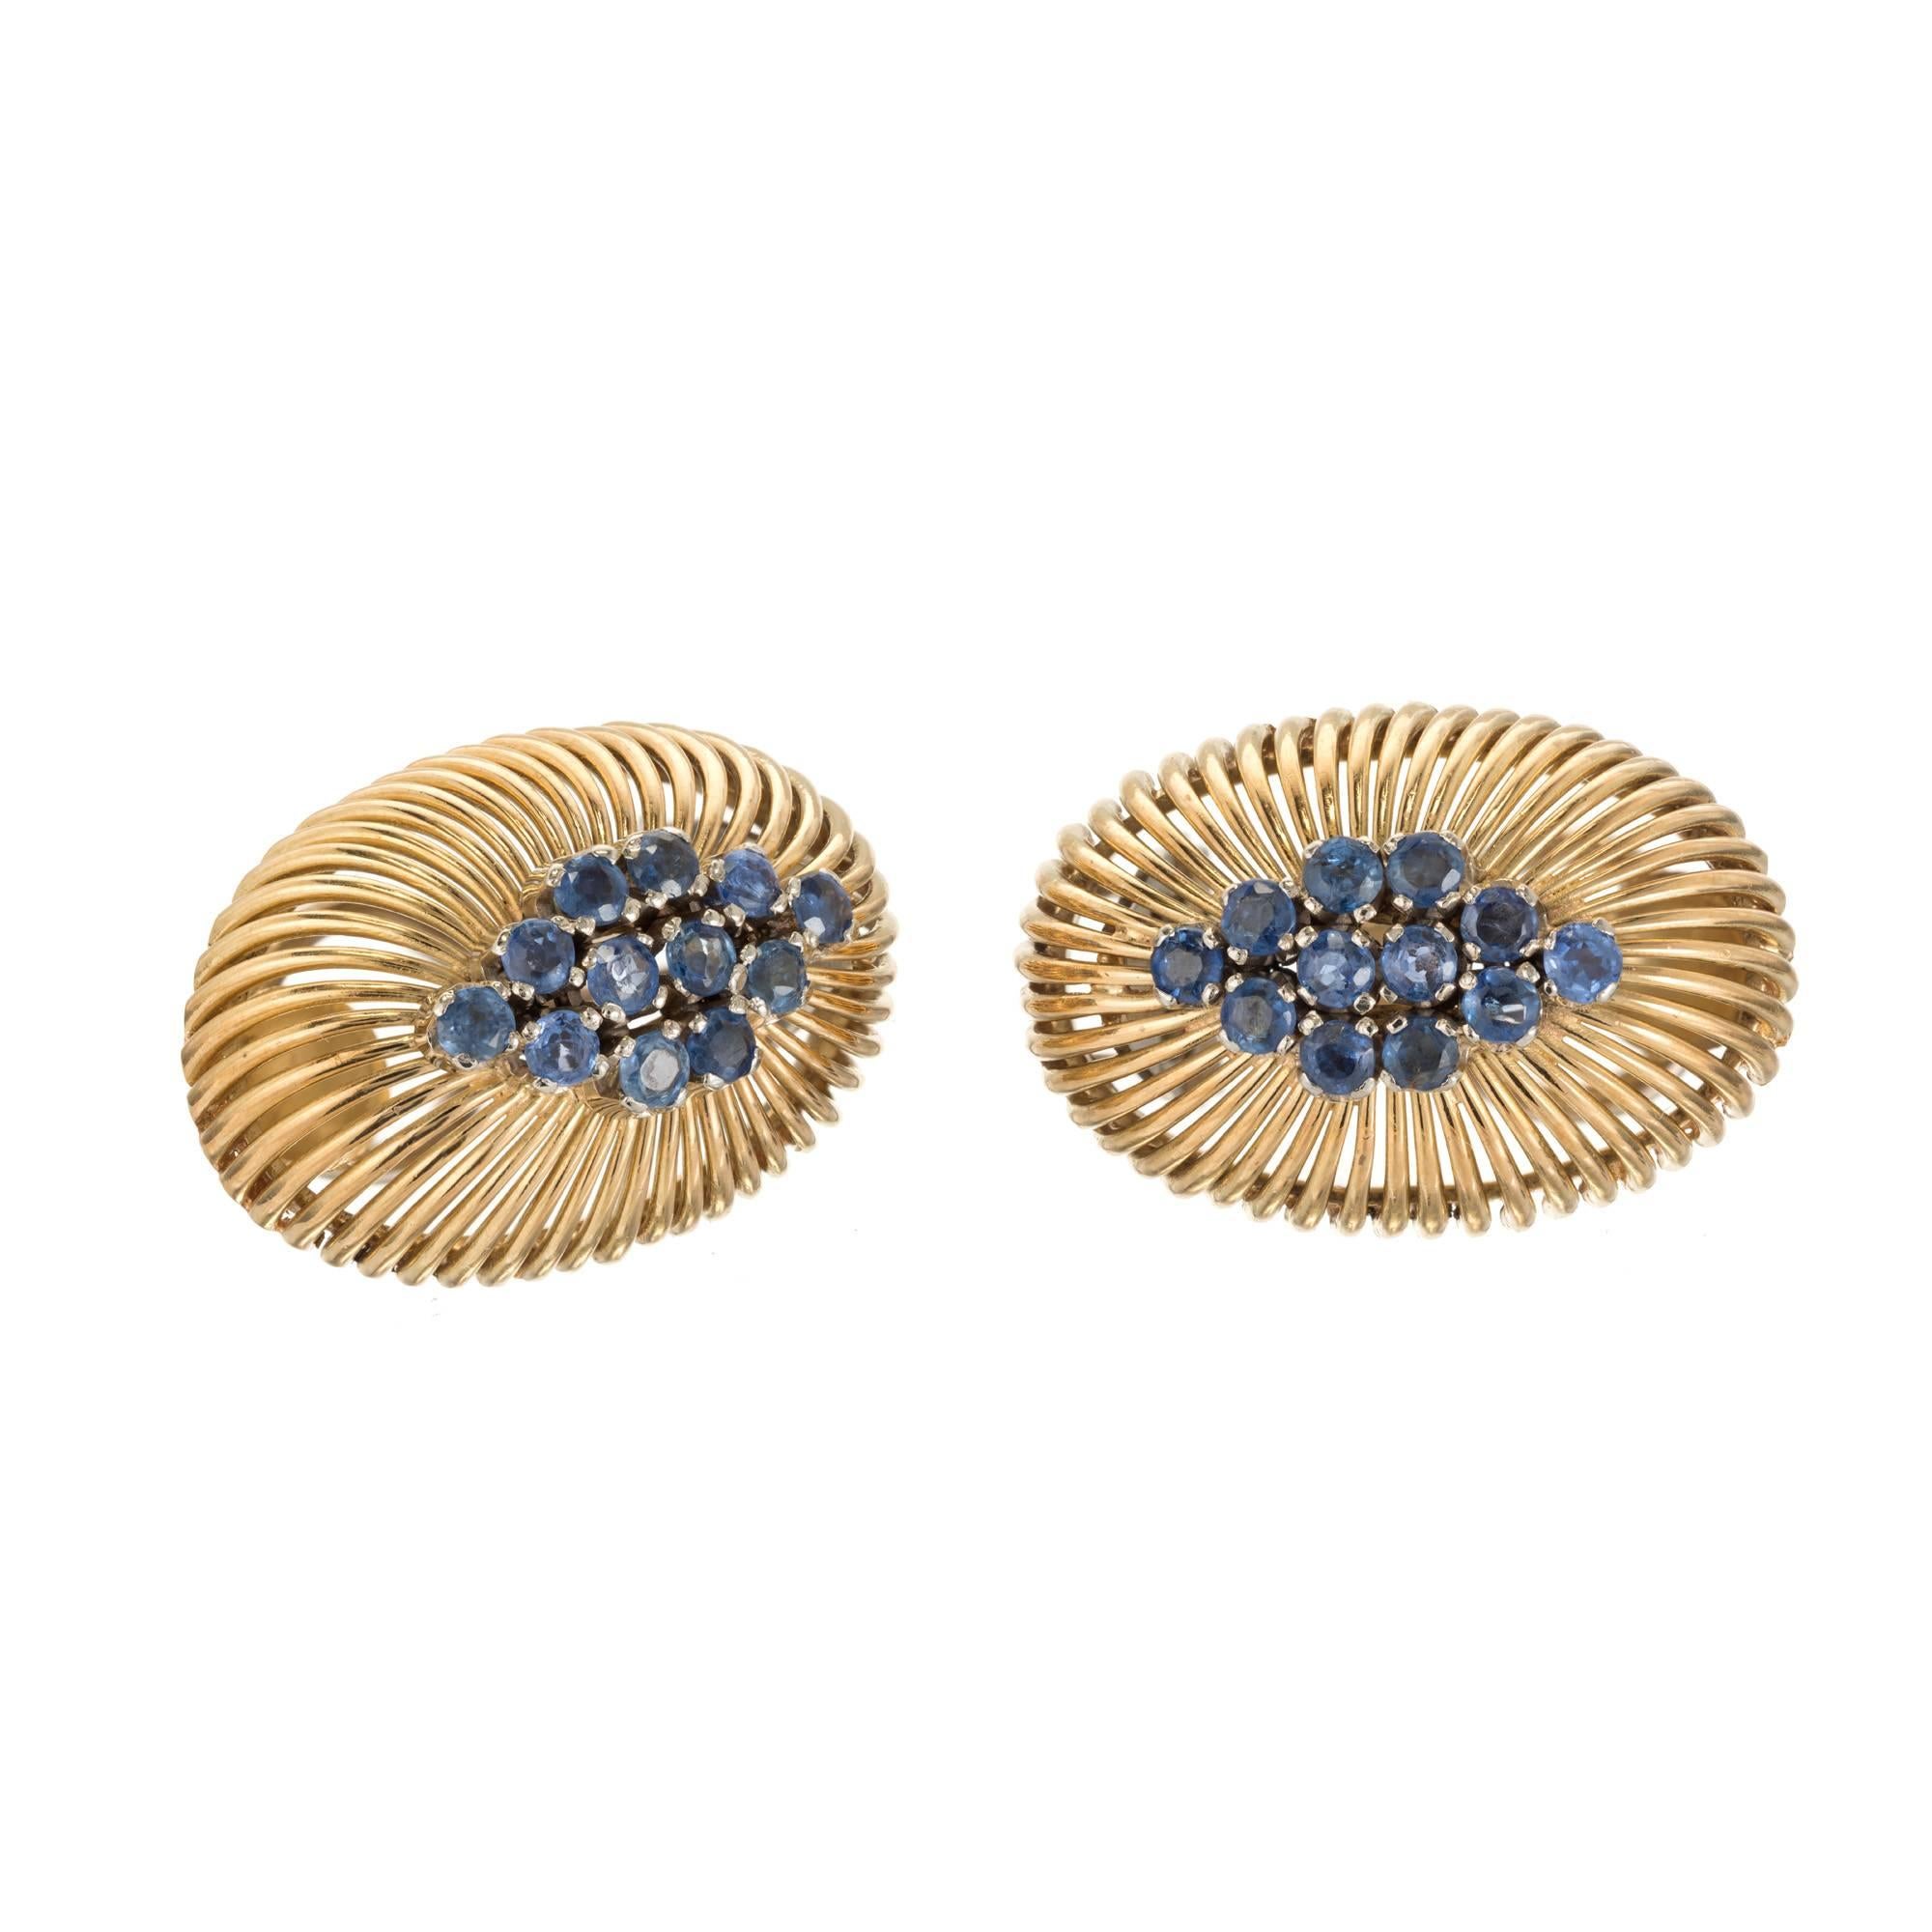 Handmade Italian clip post sapphire earrings in white and yellow 18k gold.

18k Yellow and white gold
24 round blue Sapphires, approx. total weight 1.00cts, SI1
Top to bottom: 23mm or .90 inch
Width: 15.77mm or .62 inch
Depth: 9.74mm
13.7